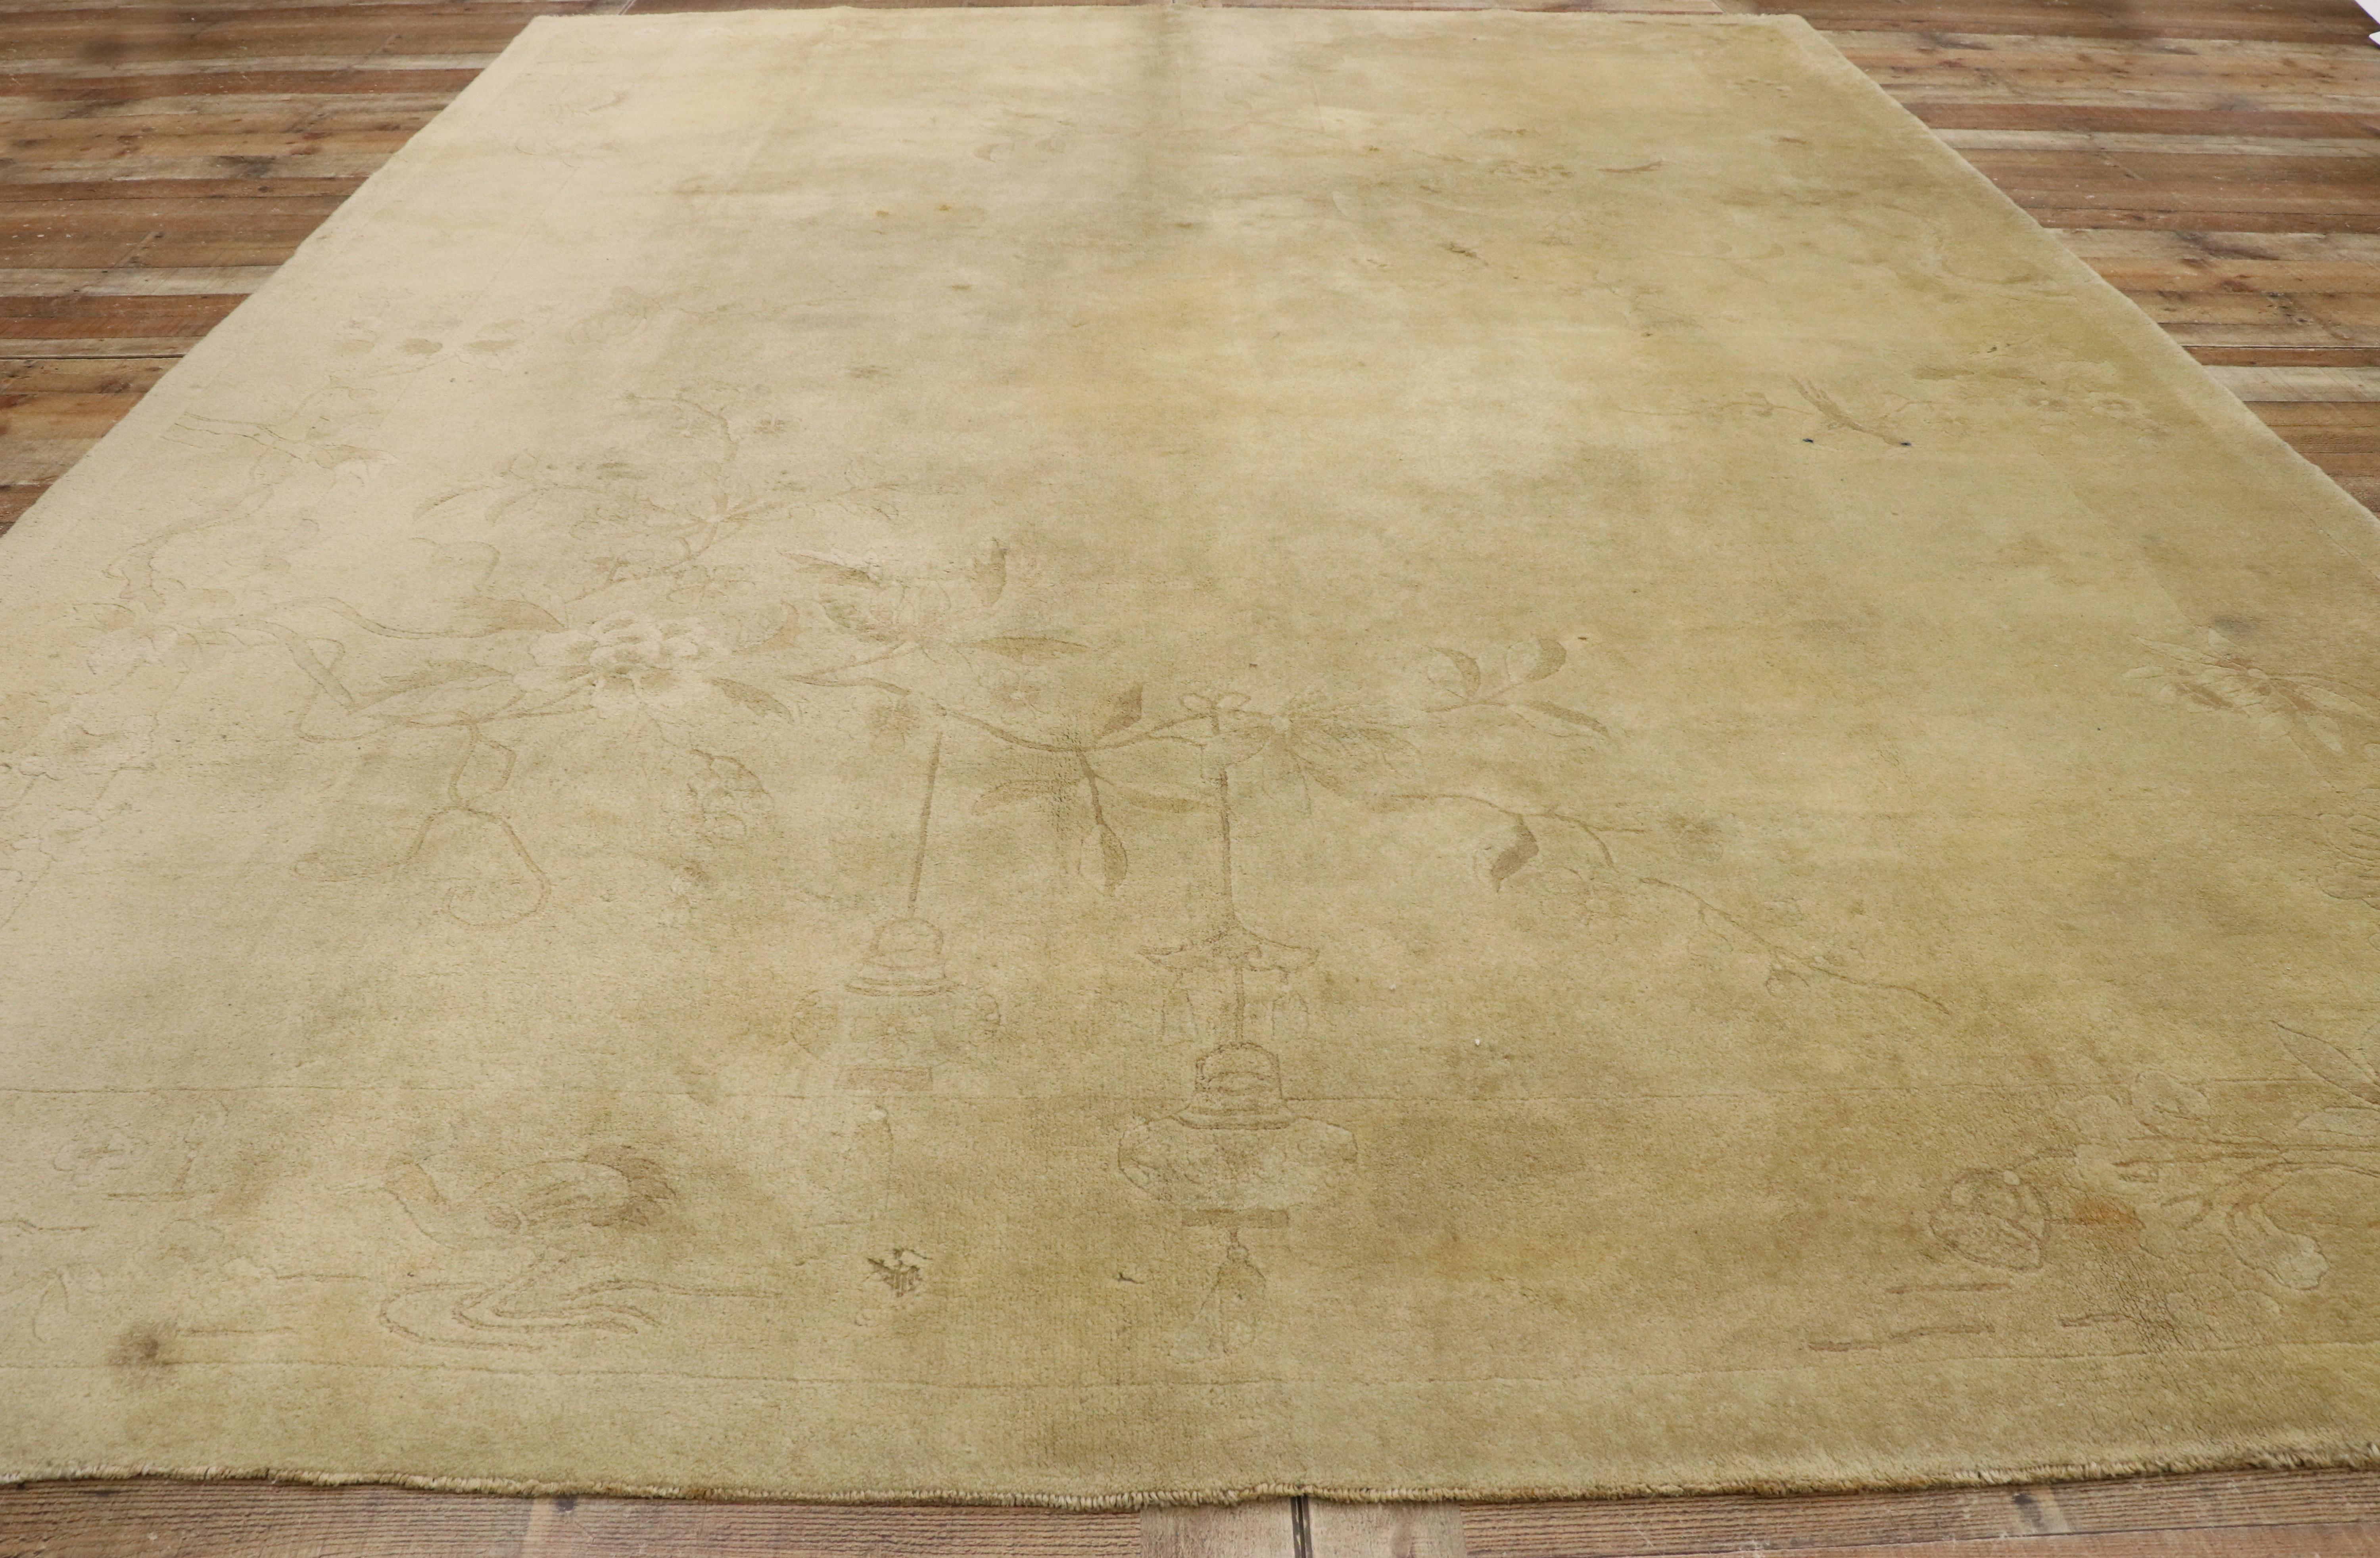 Antique Chinese Art Deco Rug with Minimalist Style 1